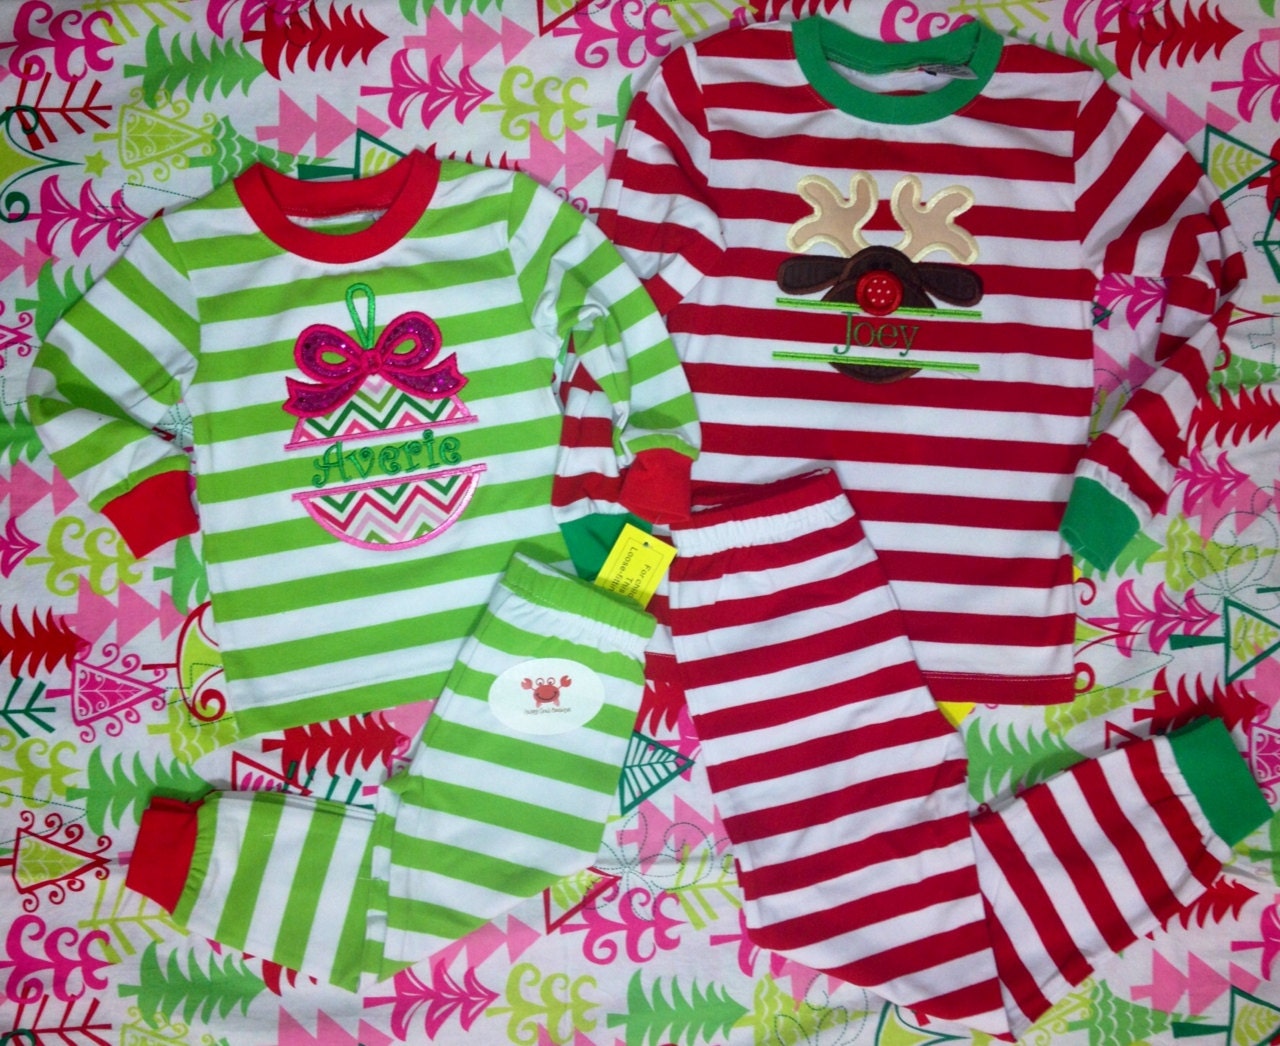 2012 Christmas Pj Striped RED 3t only Reduced by HappyCrabBoutique